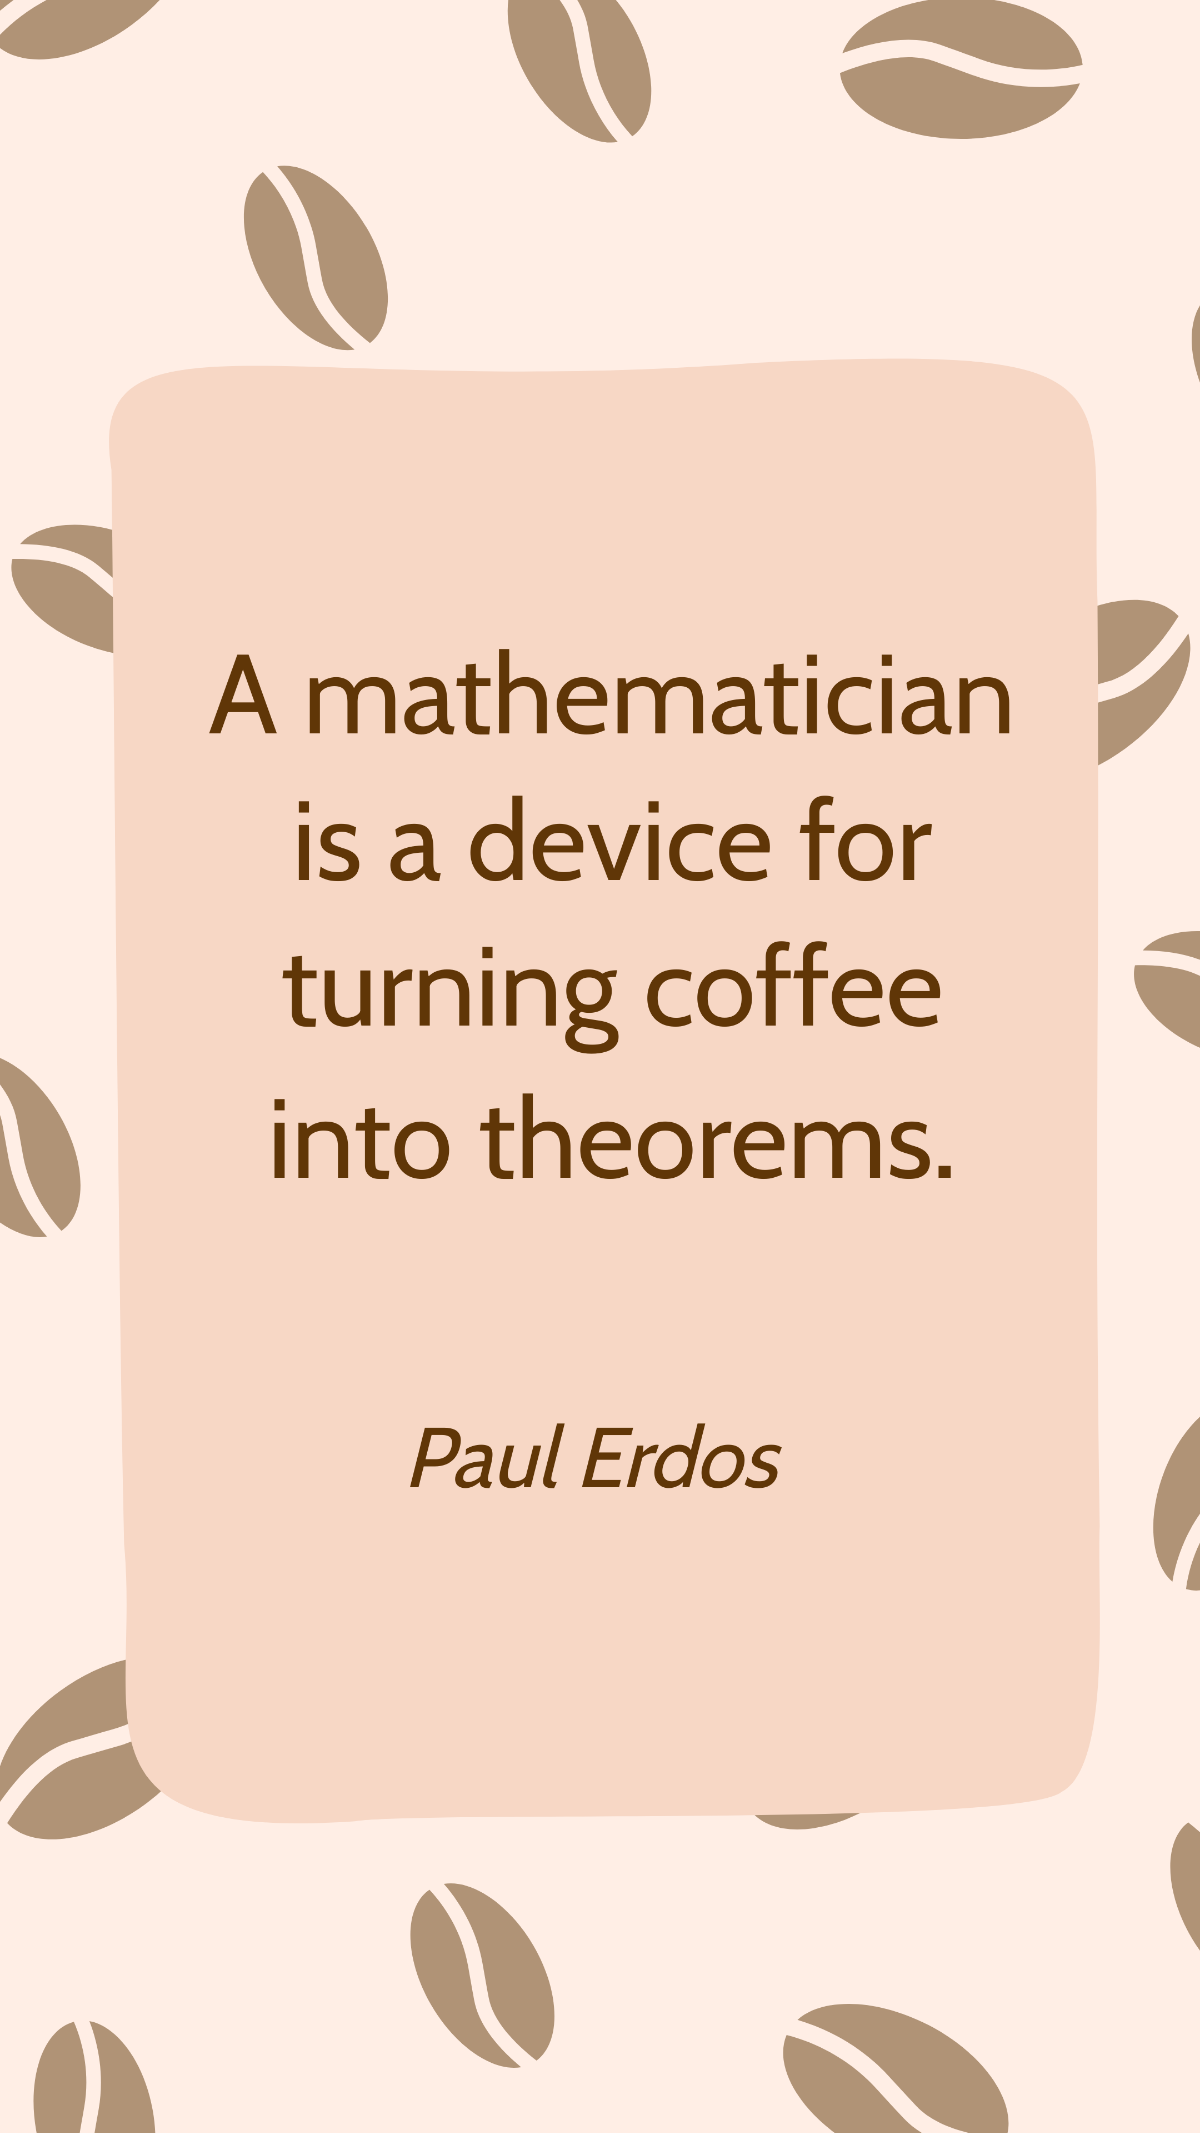 Paul Erdos - A mathematician is a device for turning coffee into theorems.